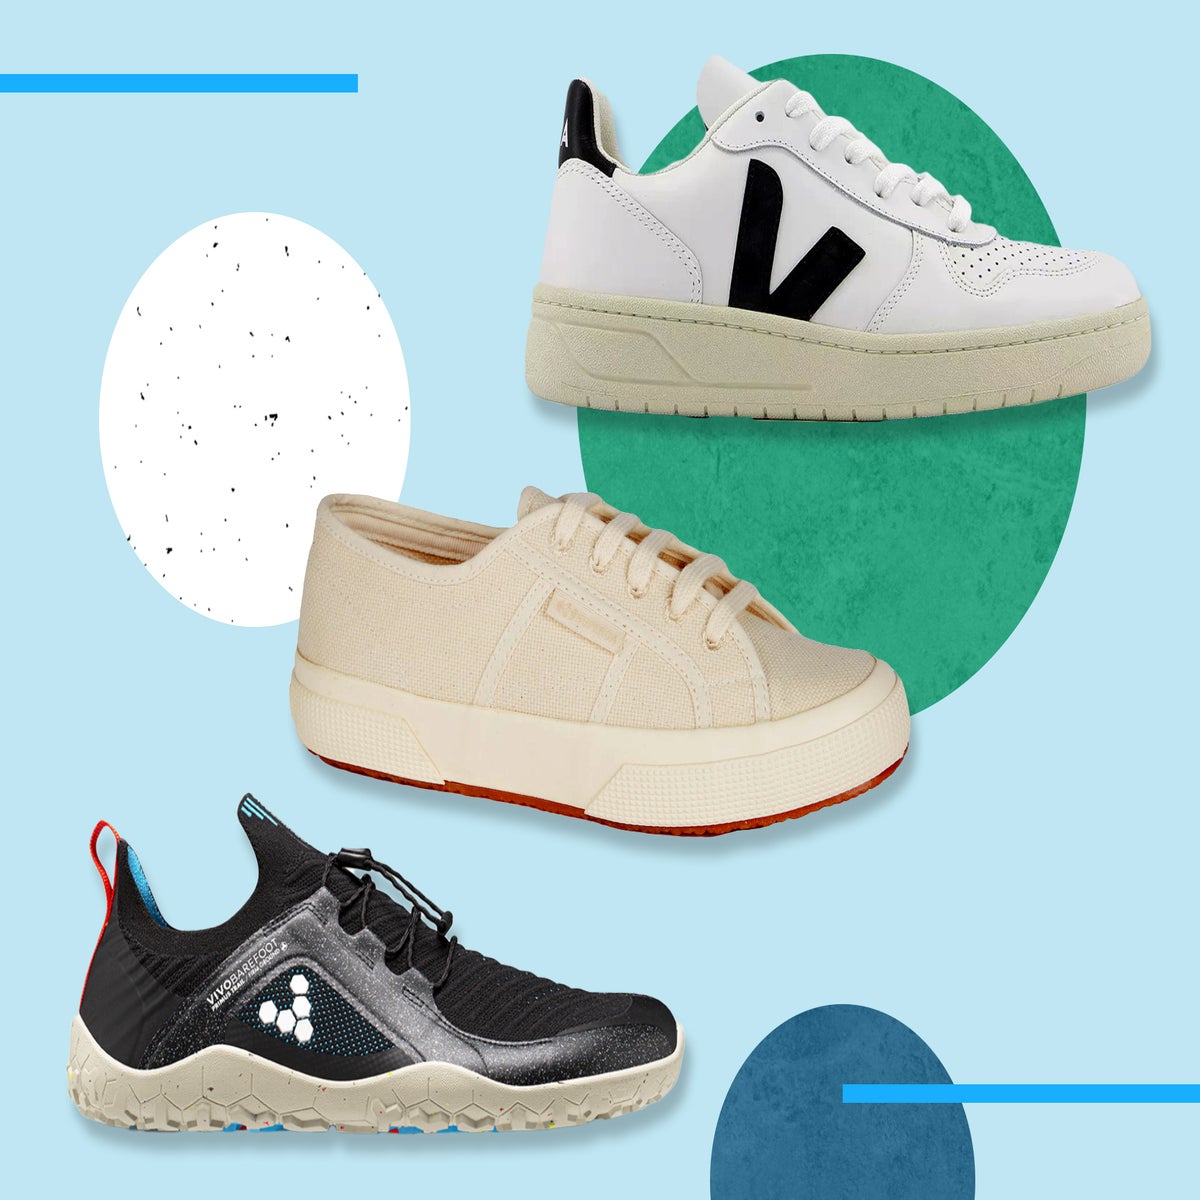 Best vegan trainers 2022: From plant-based to recycled materials